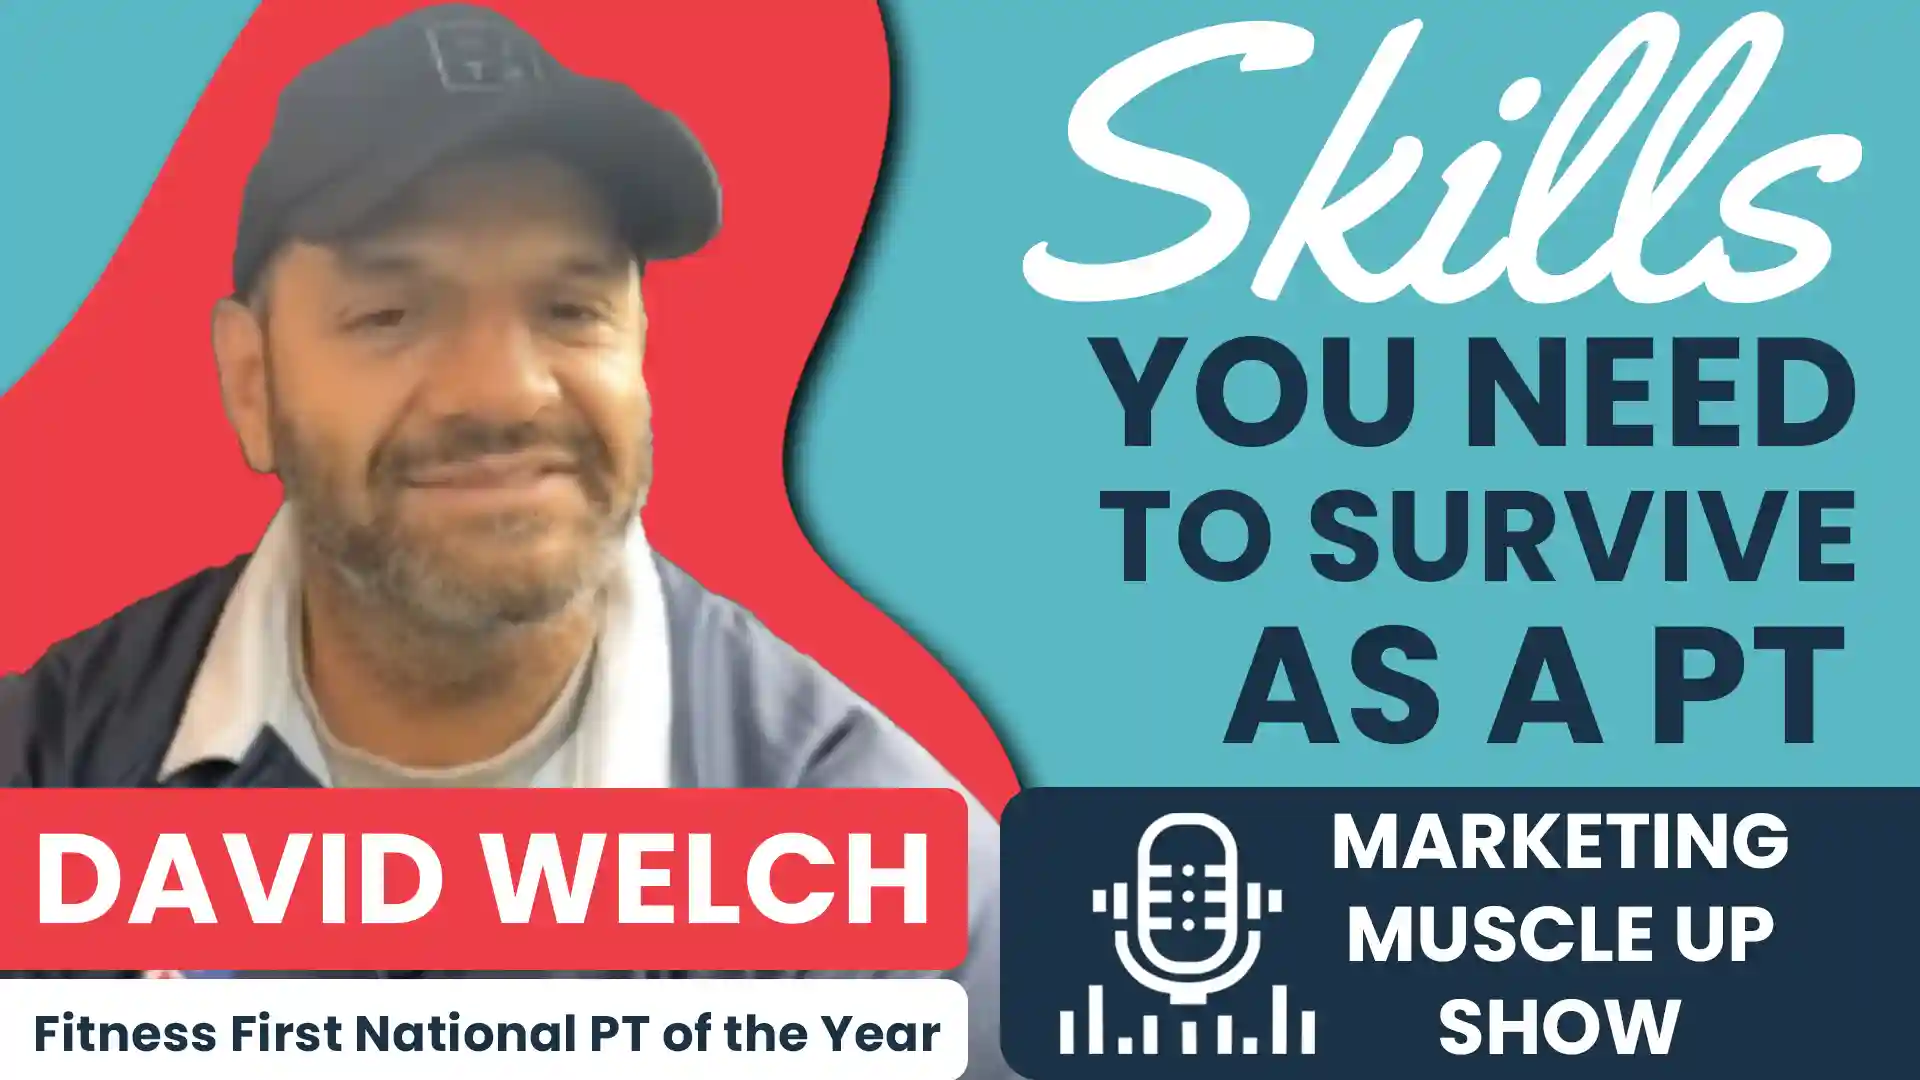 The Skills You Need To Survive as a Personal Trainer with David Welch